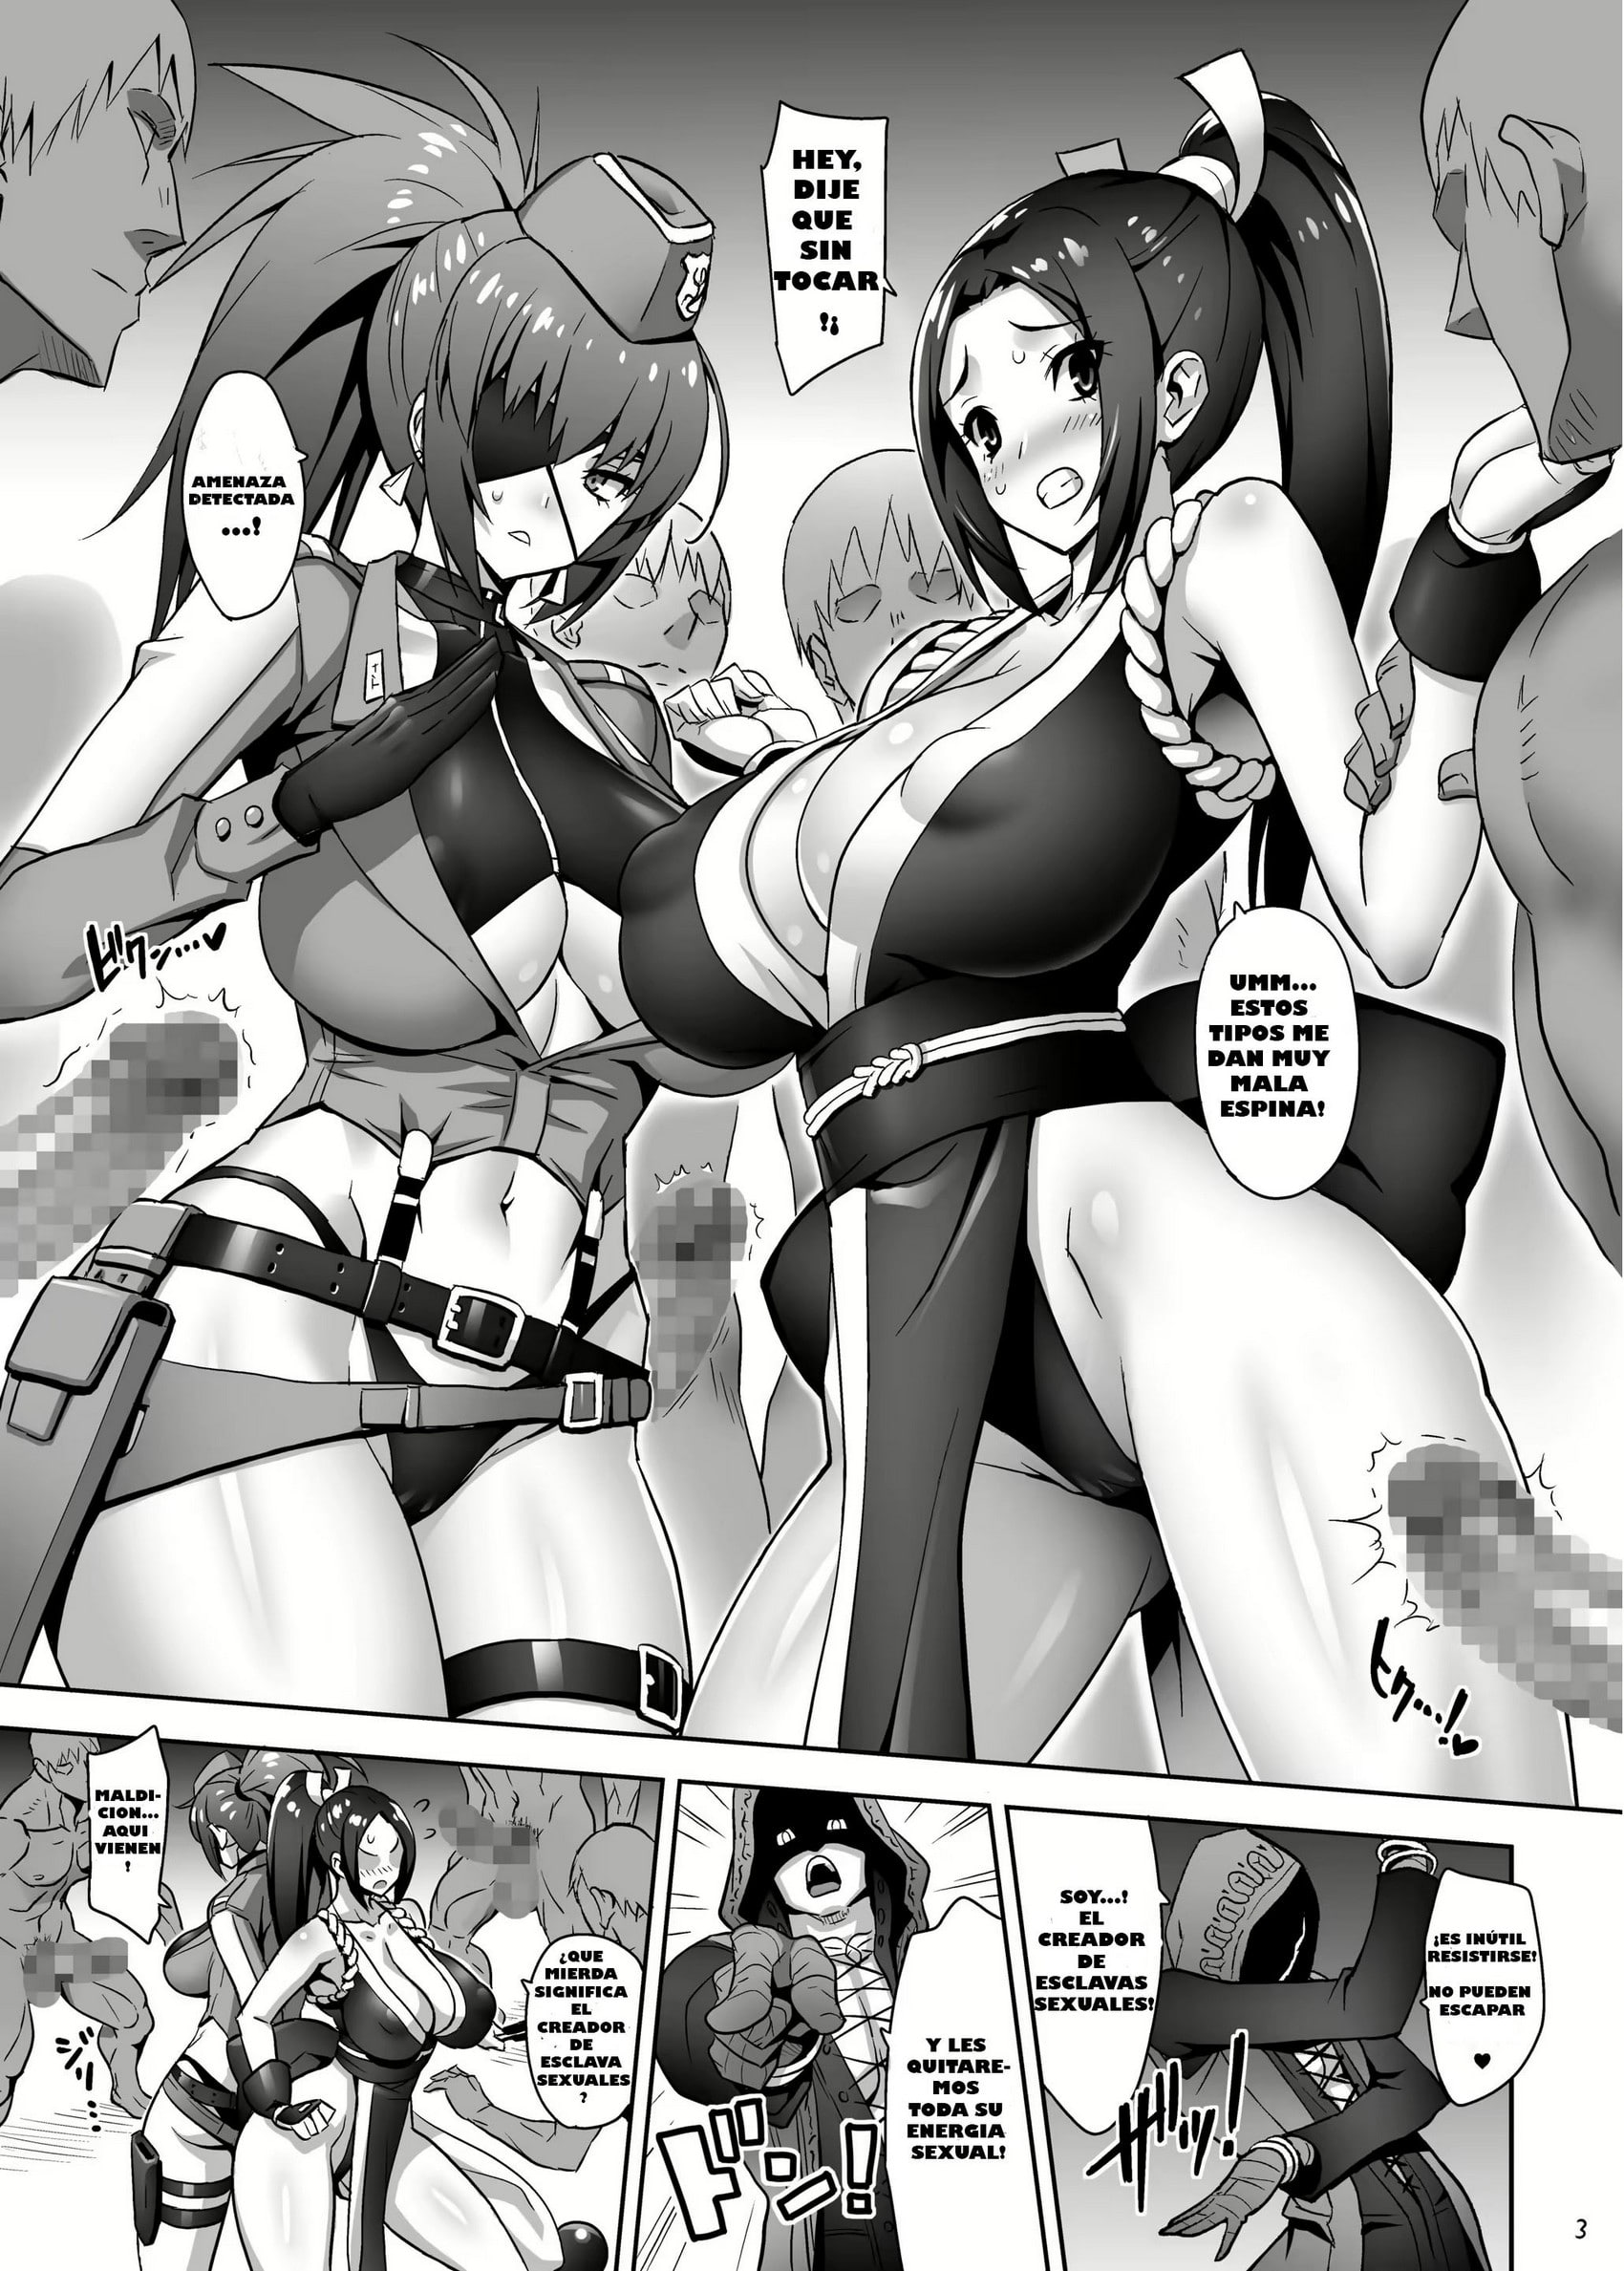 Jiggling Fighters 02